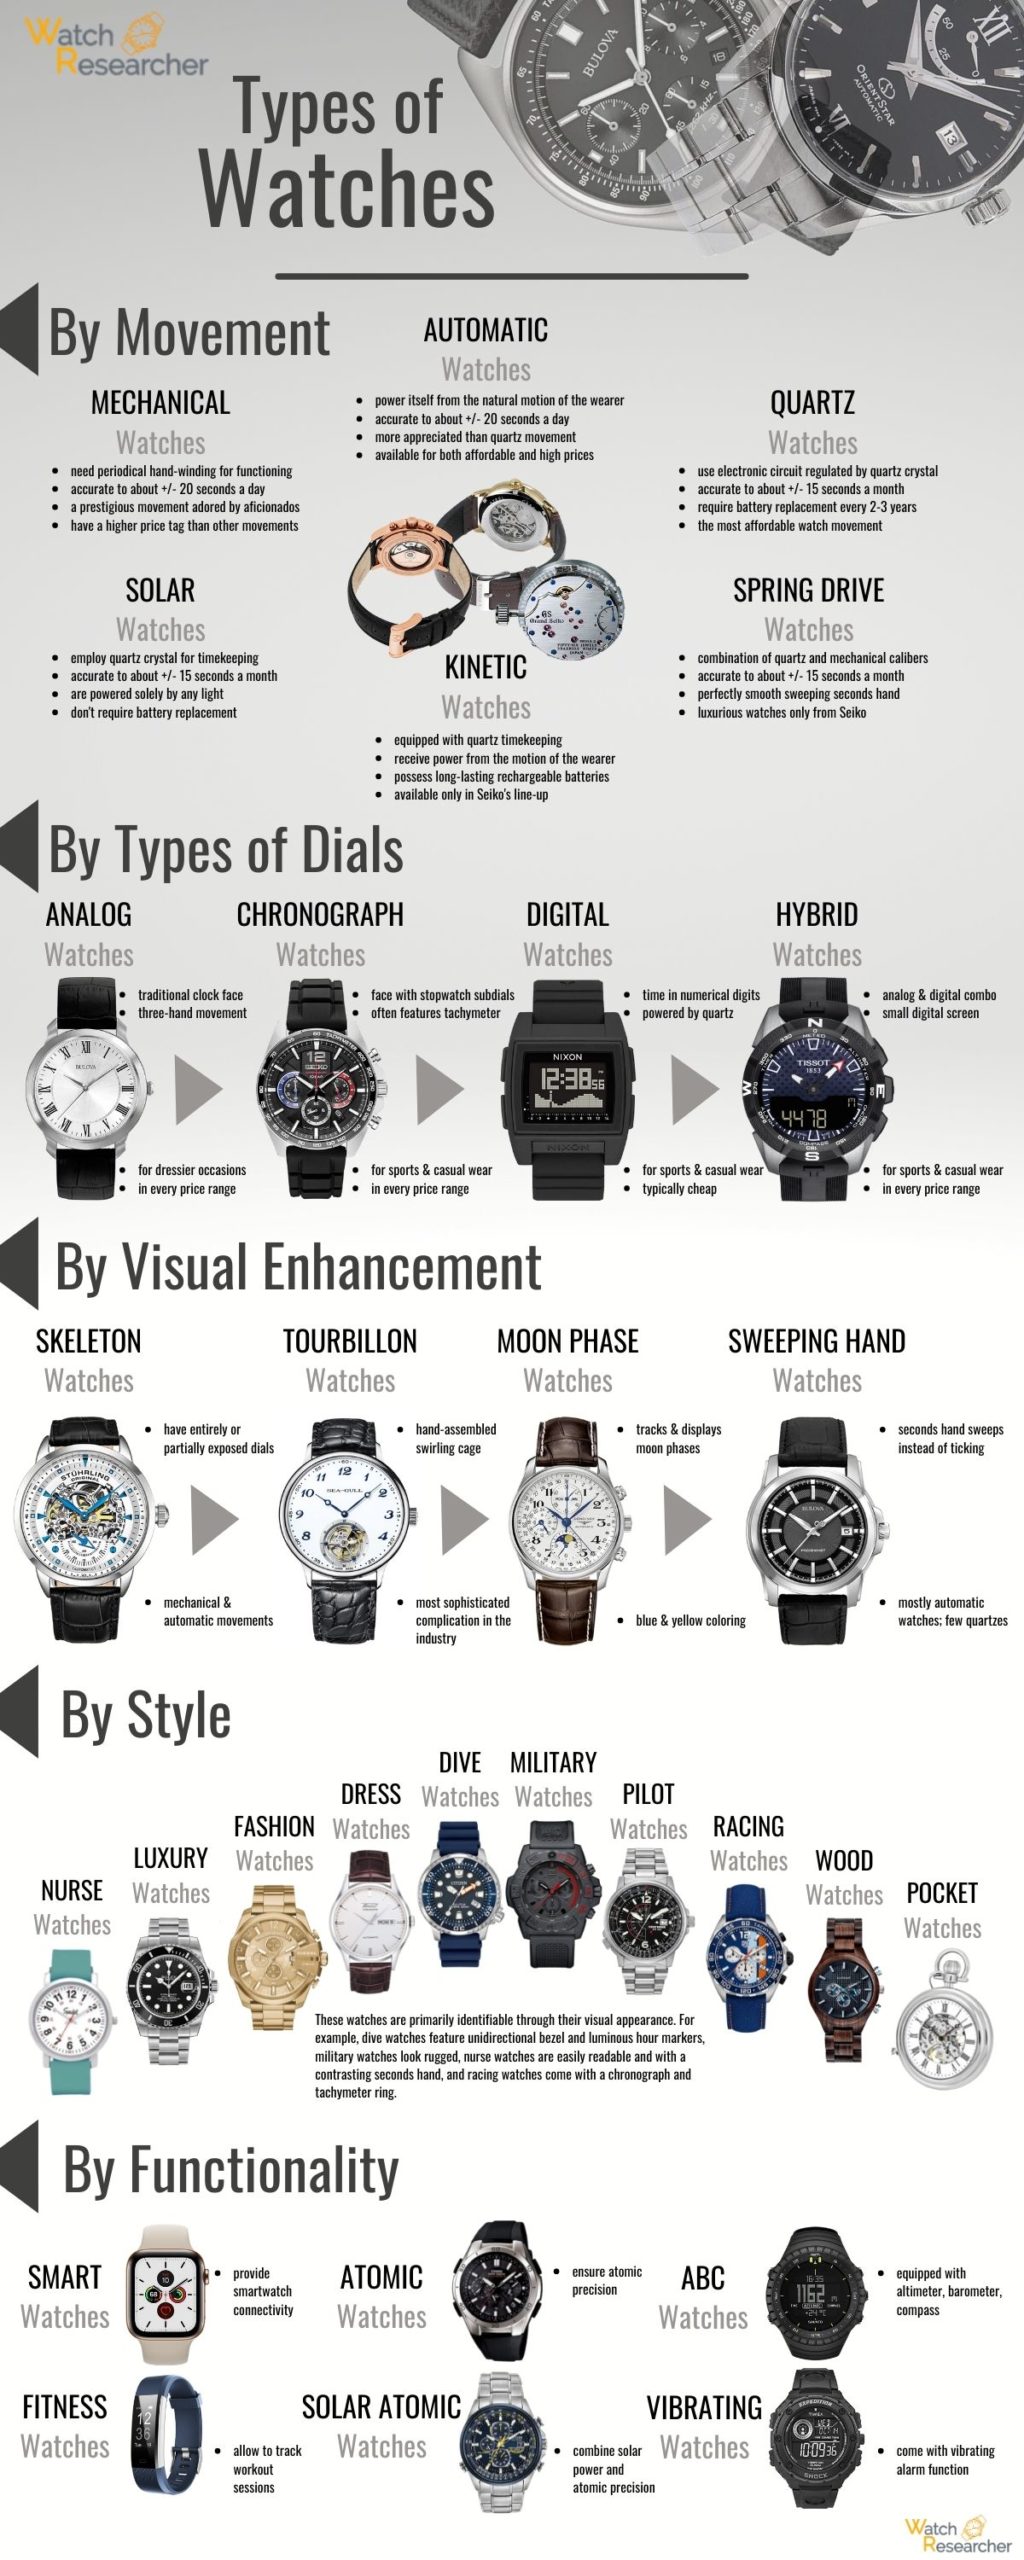 Types-of-watches-infographic-scaled.jpg